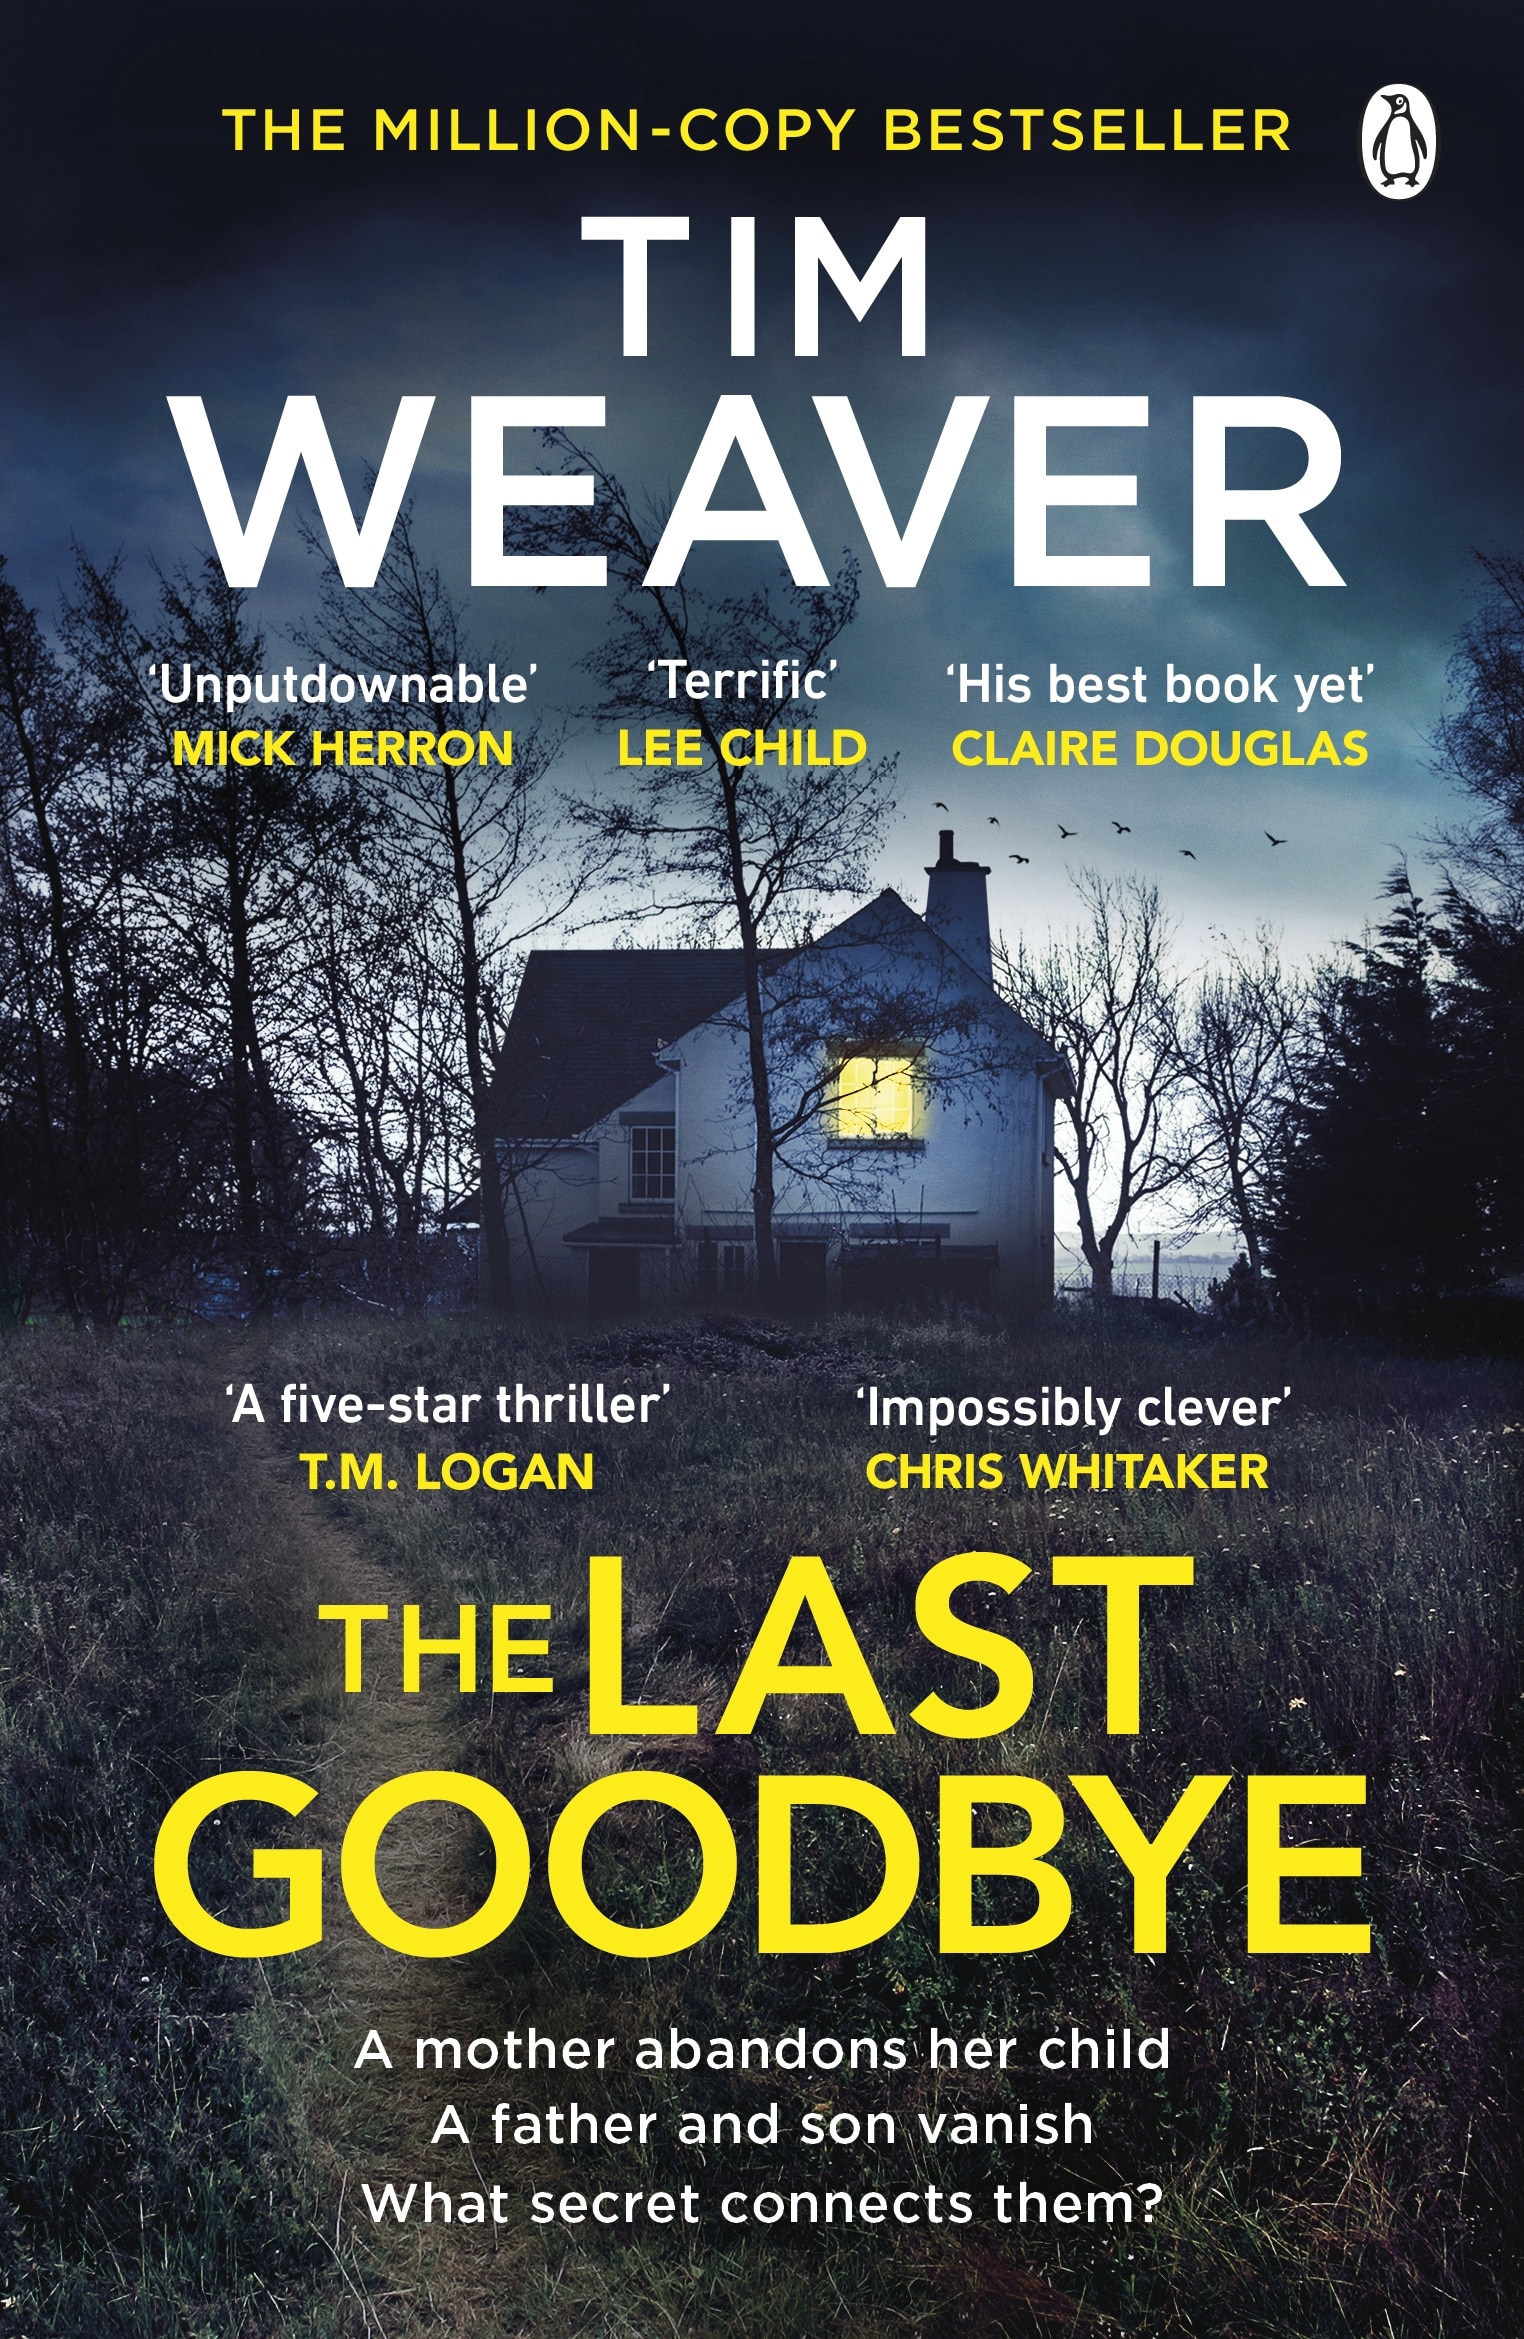 The Last Goodbye by Tim Weaver book cover